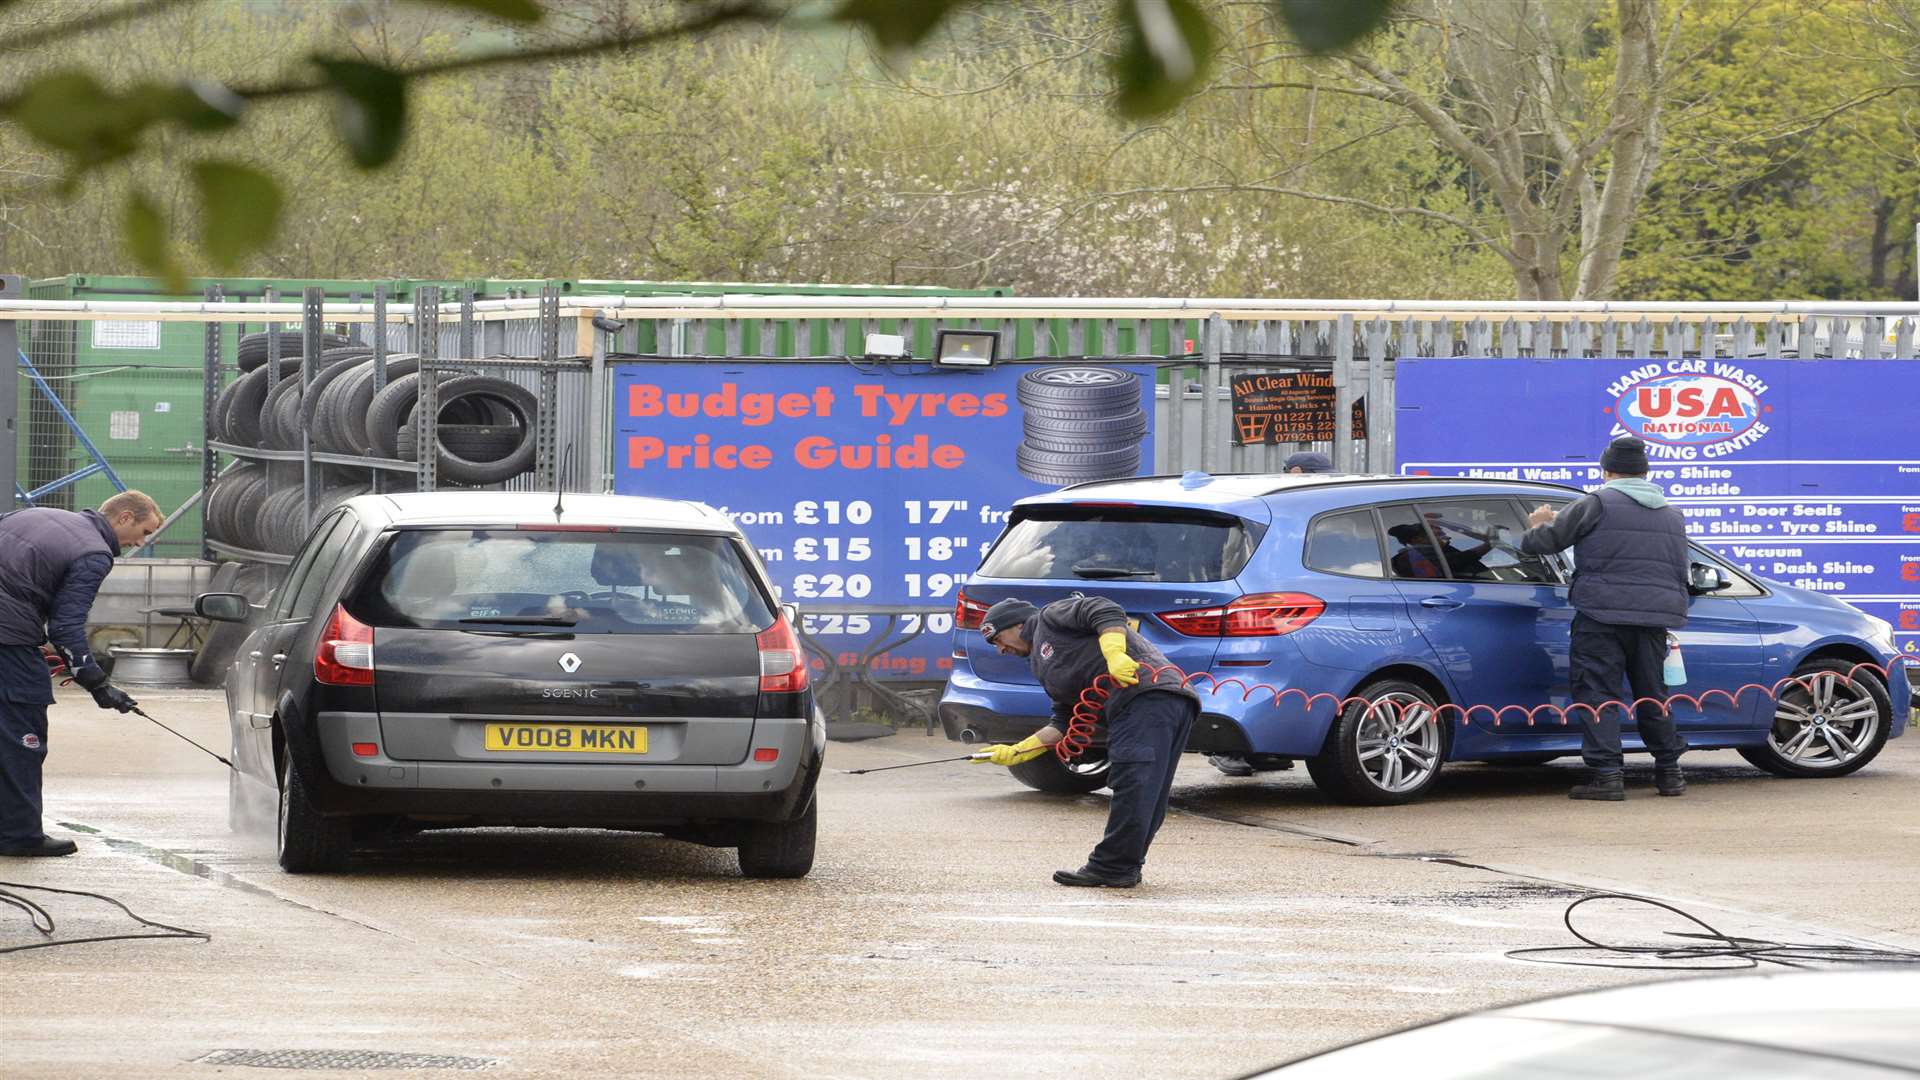 USA Car Wash on the Wyevale Garden Centre site at Chartham Hatch Picture: Chris Davey